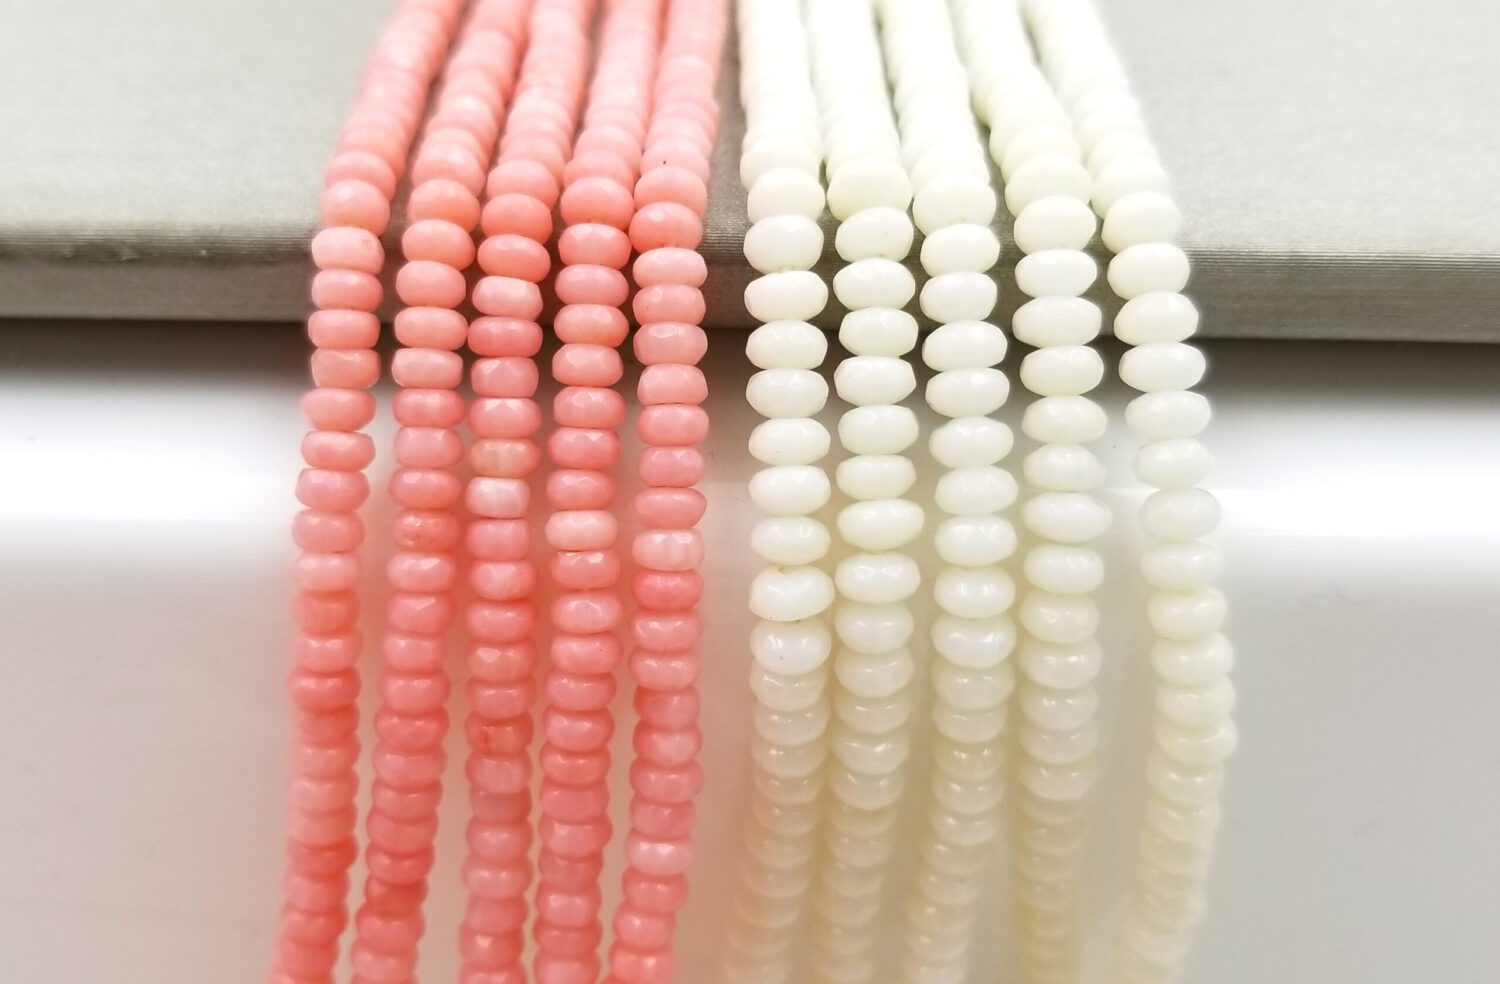 Coral Beads, Pink Coral Beads